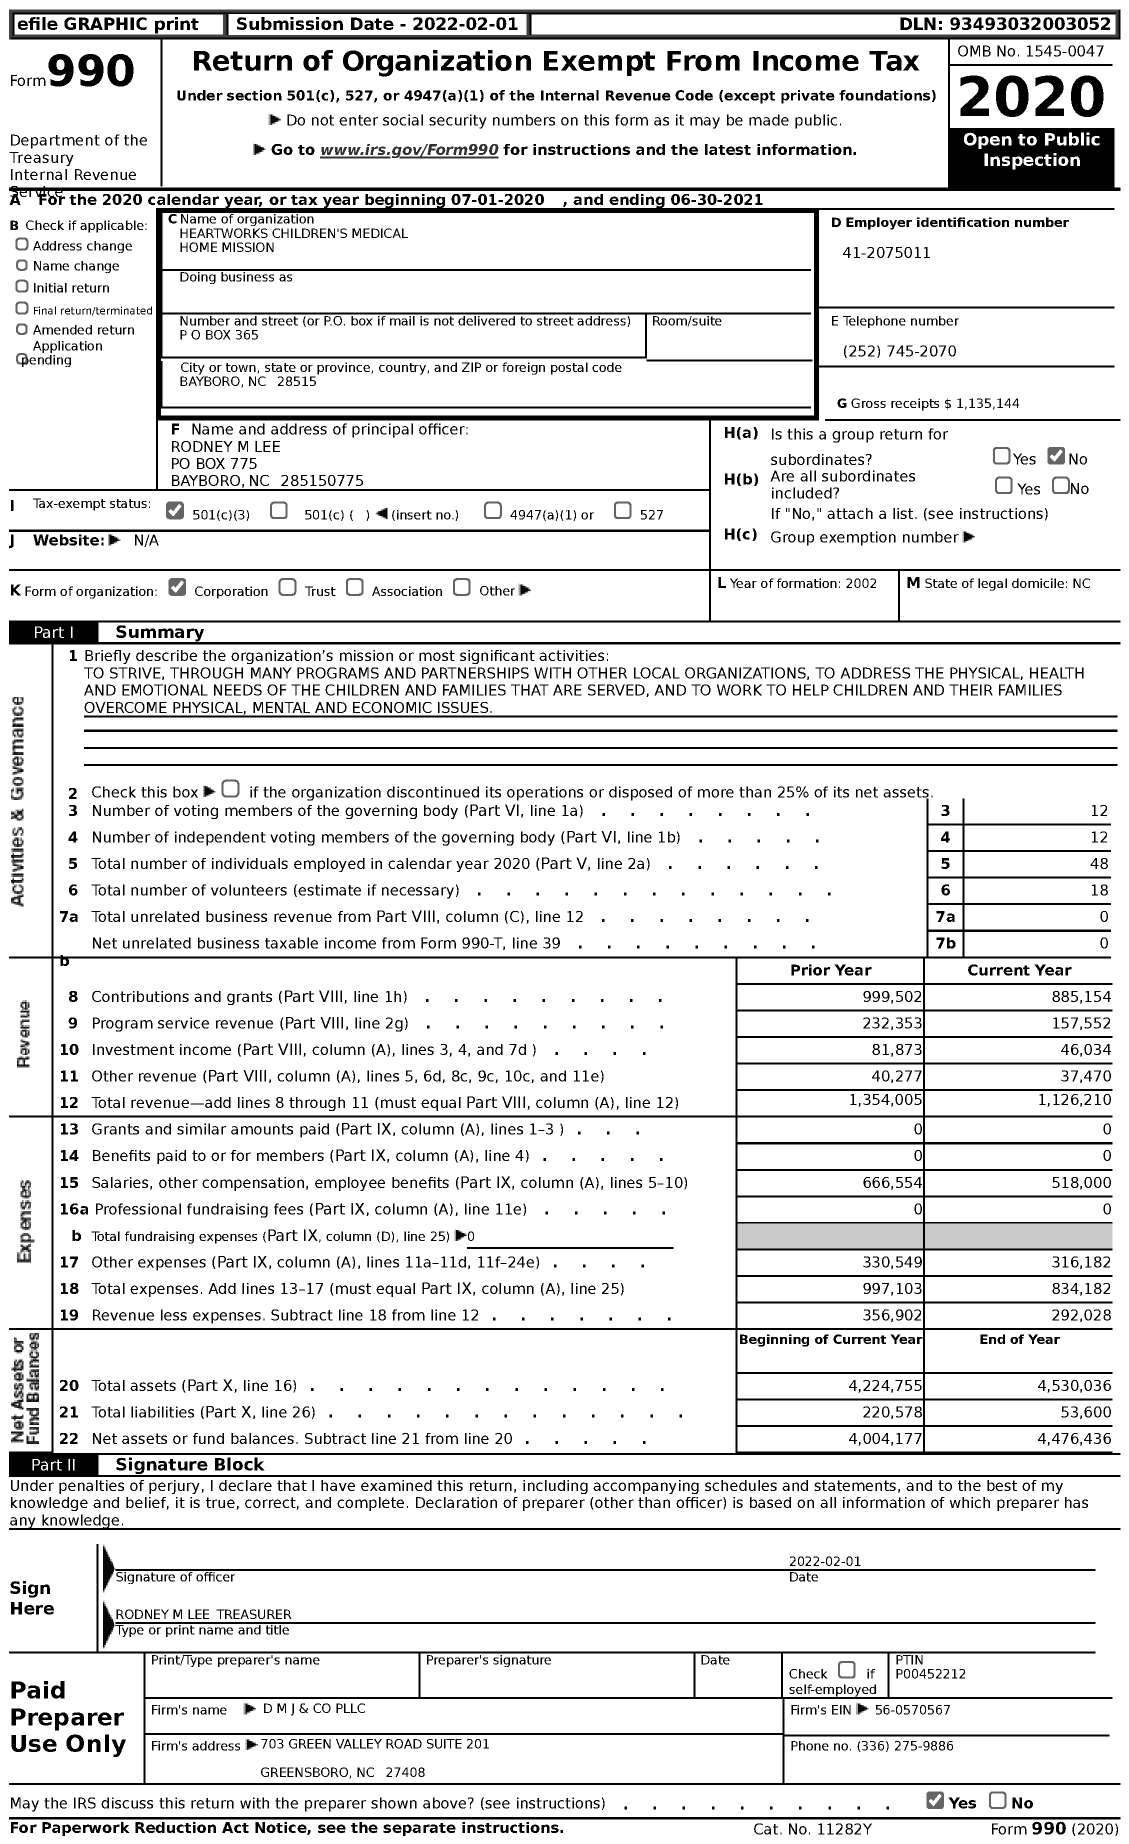 Image of first page of 2020 Form 990 for Heartworks Children's Medical Home Mission